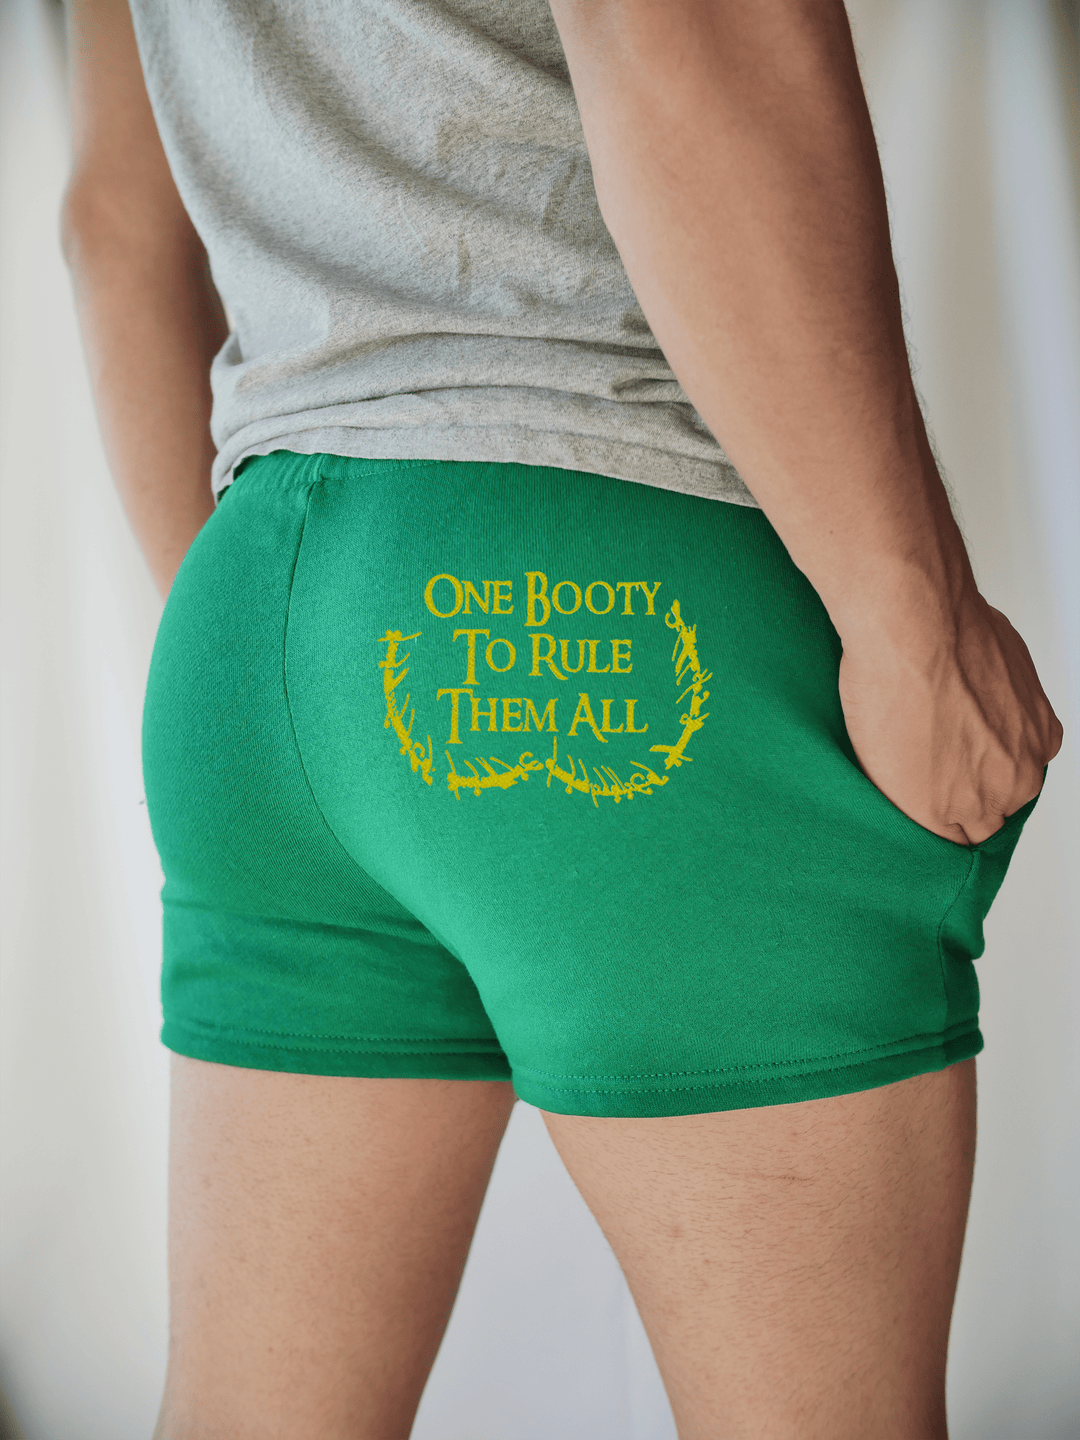 PixelThat Punderwear Shorts Kelly Green / S / Back One Booty To Rule Them All Men's Gym Shorts